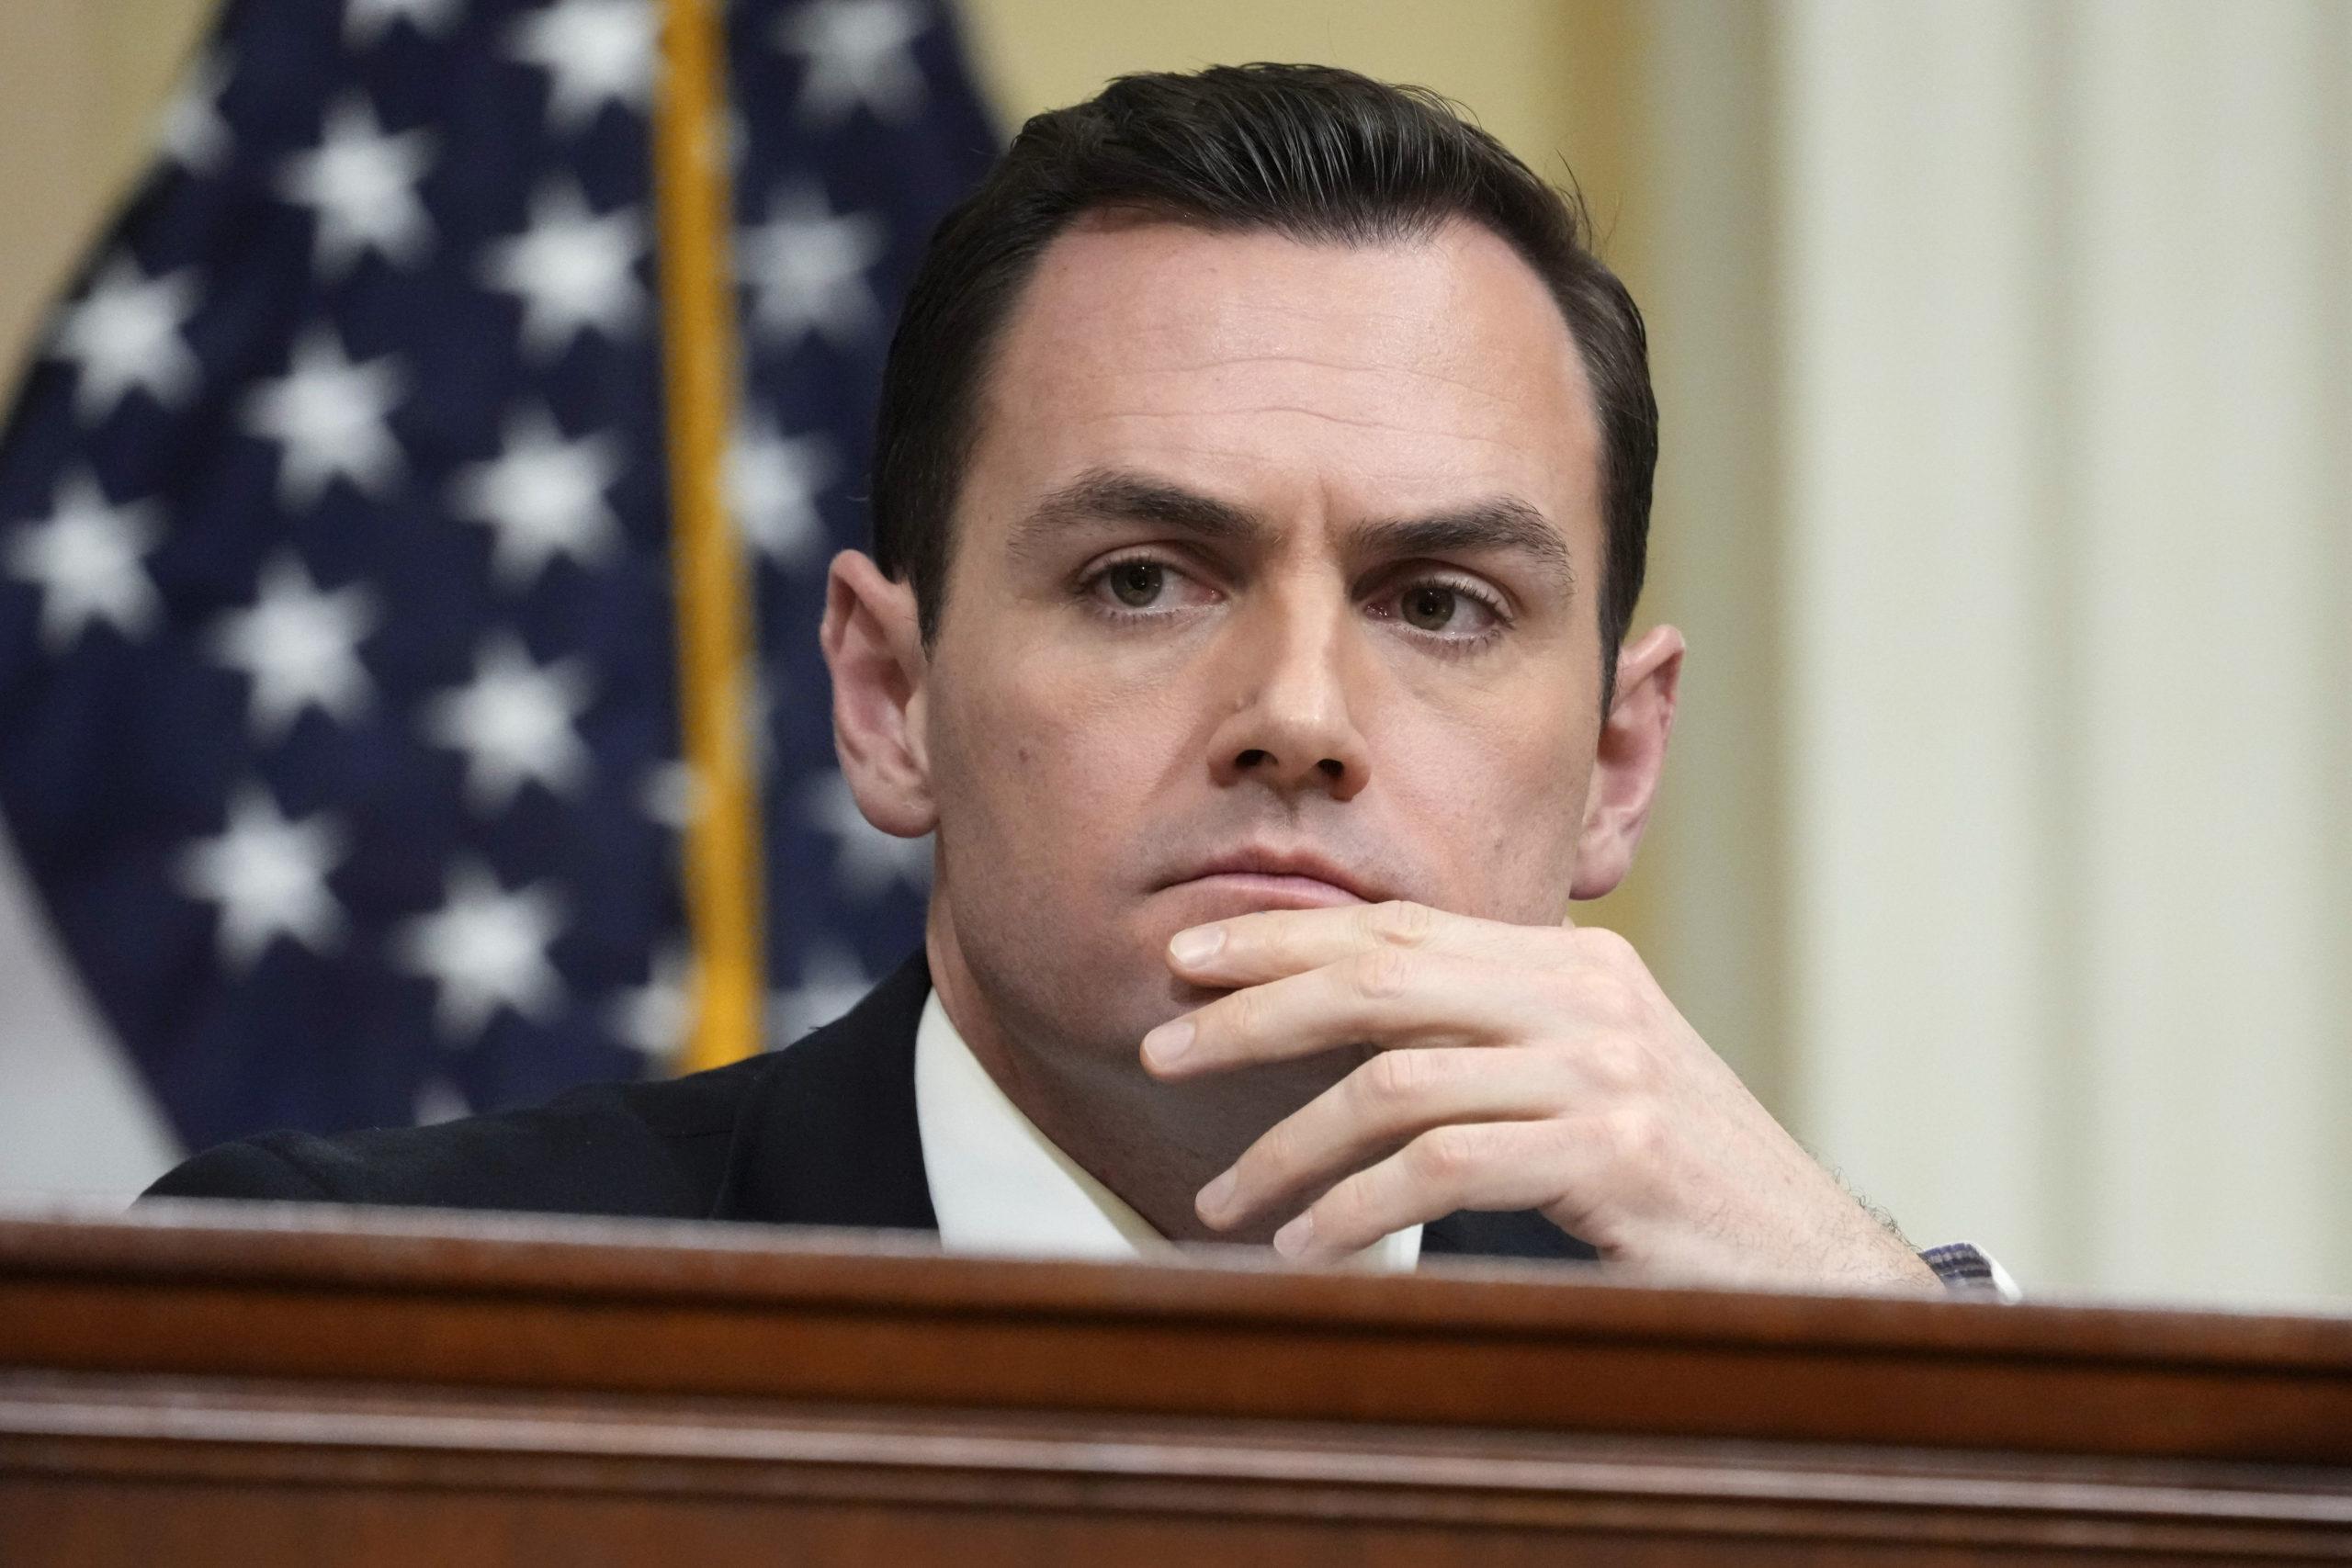 Taiwan threat from China serious, Rep. Mike Gallagher warns